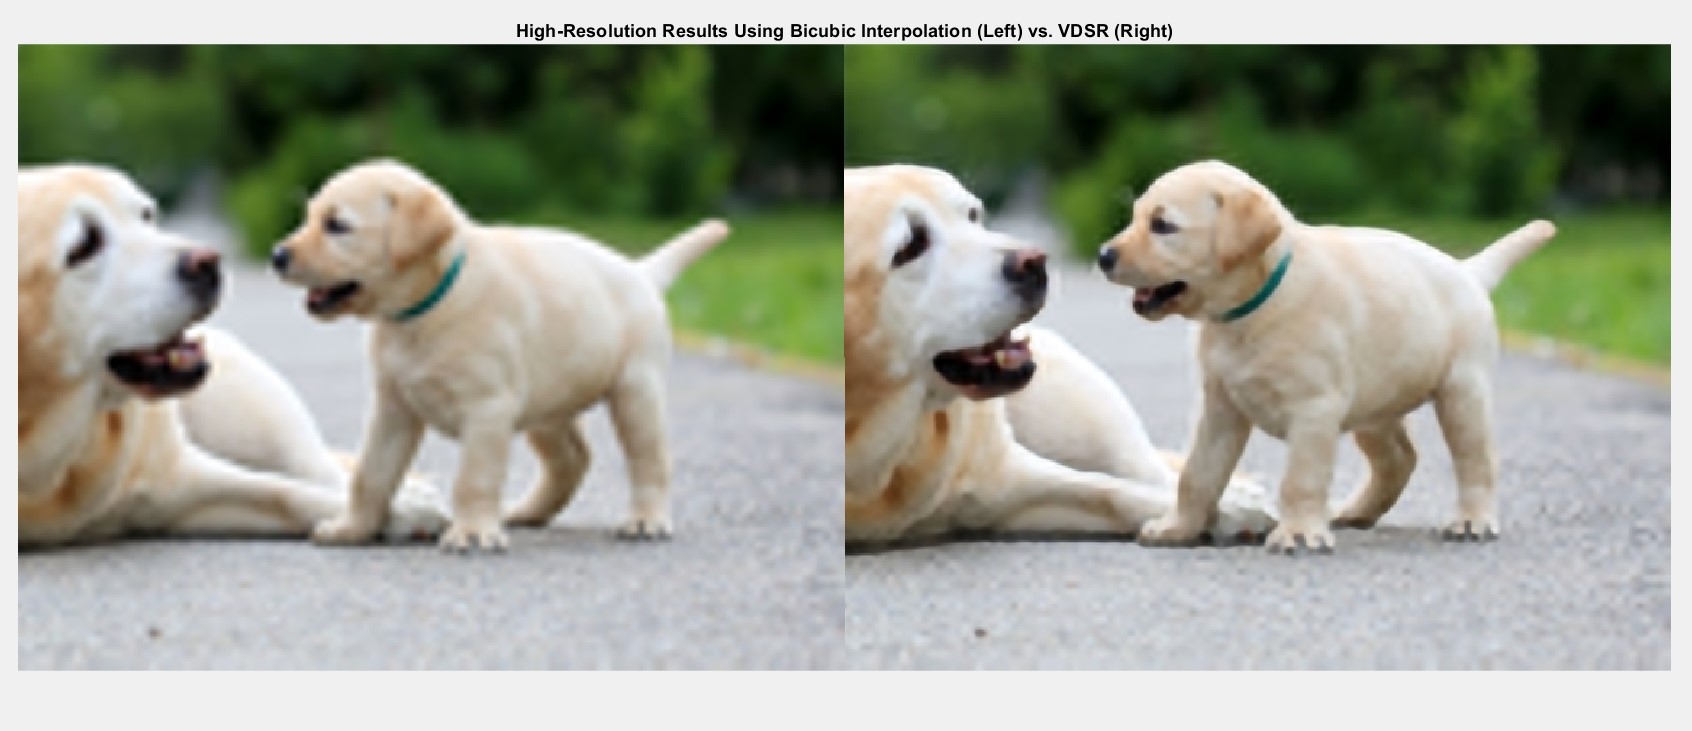 Image Super Resolution using Deep Learning